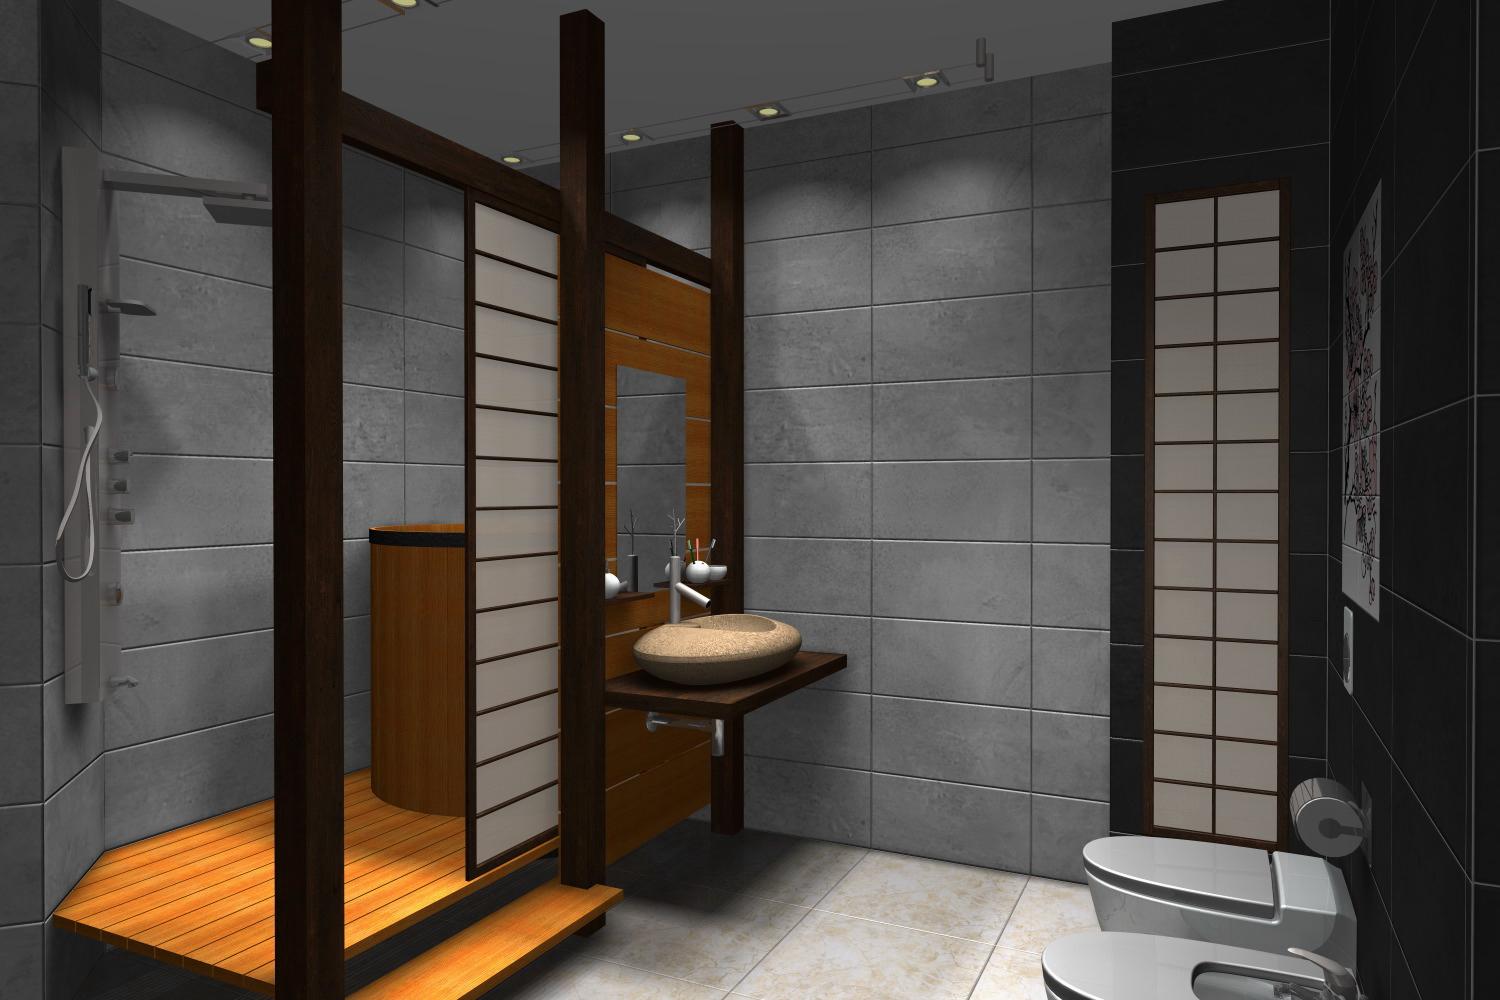 Japanese-style combined bathroom